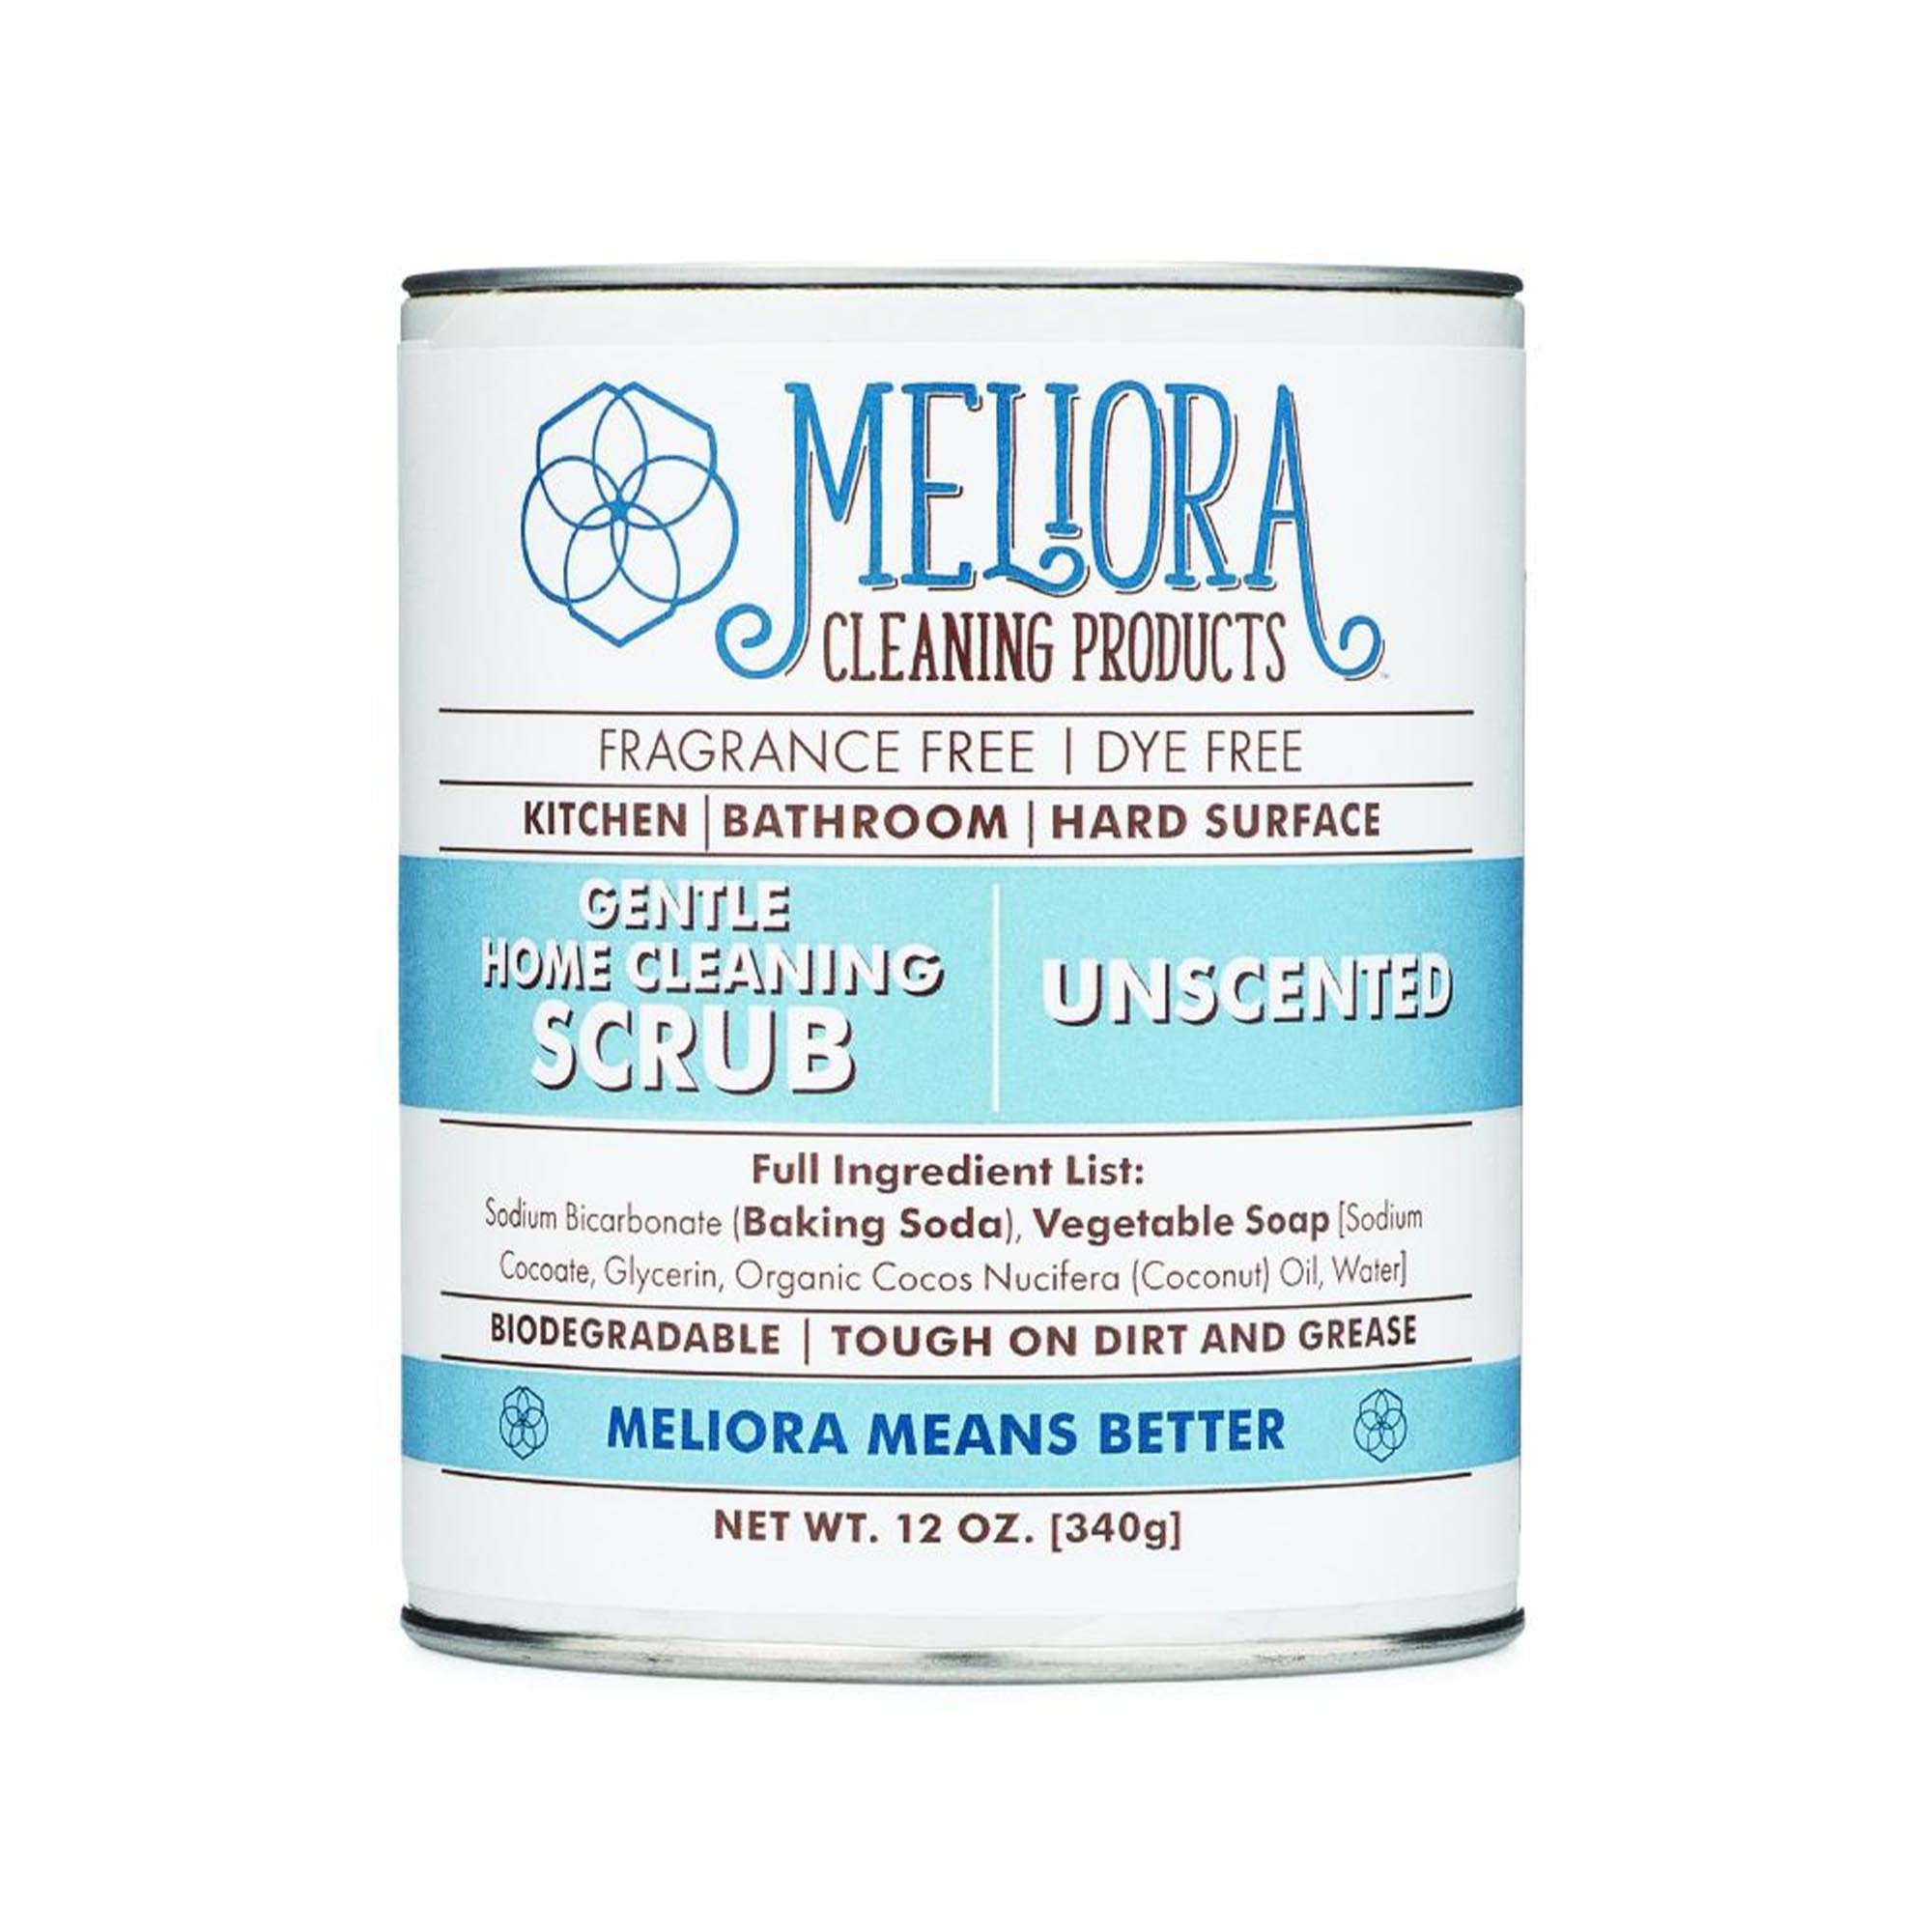 12 oz meliora cleaning scrub can, blue and white